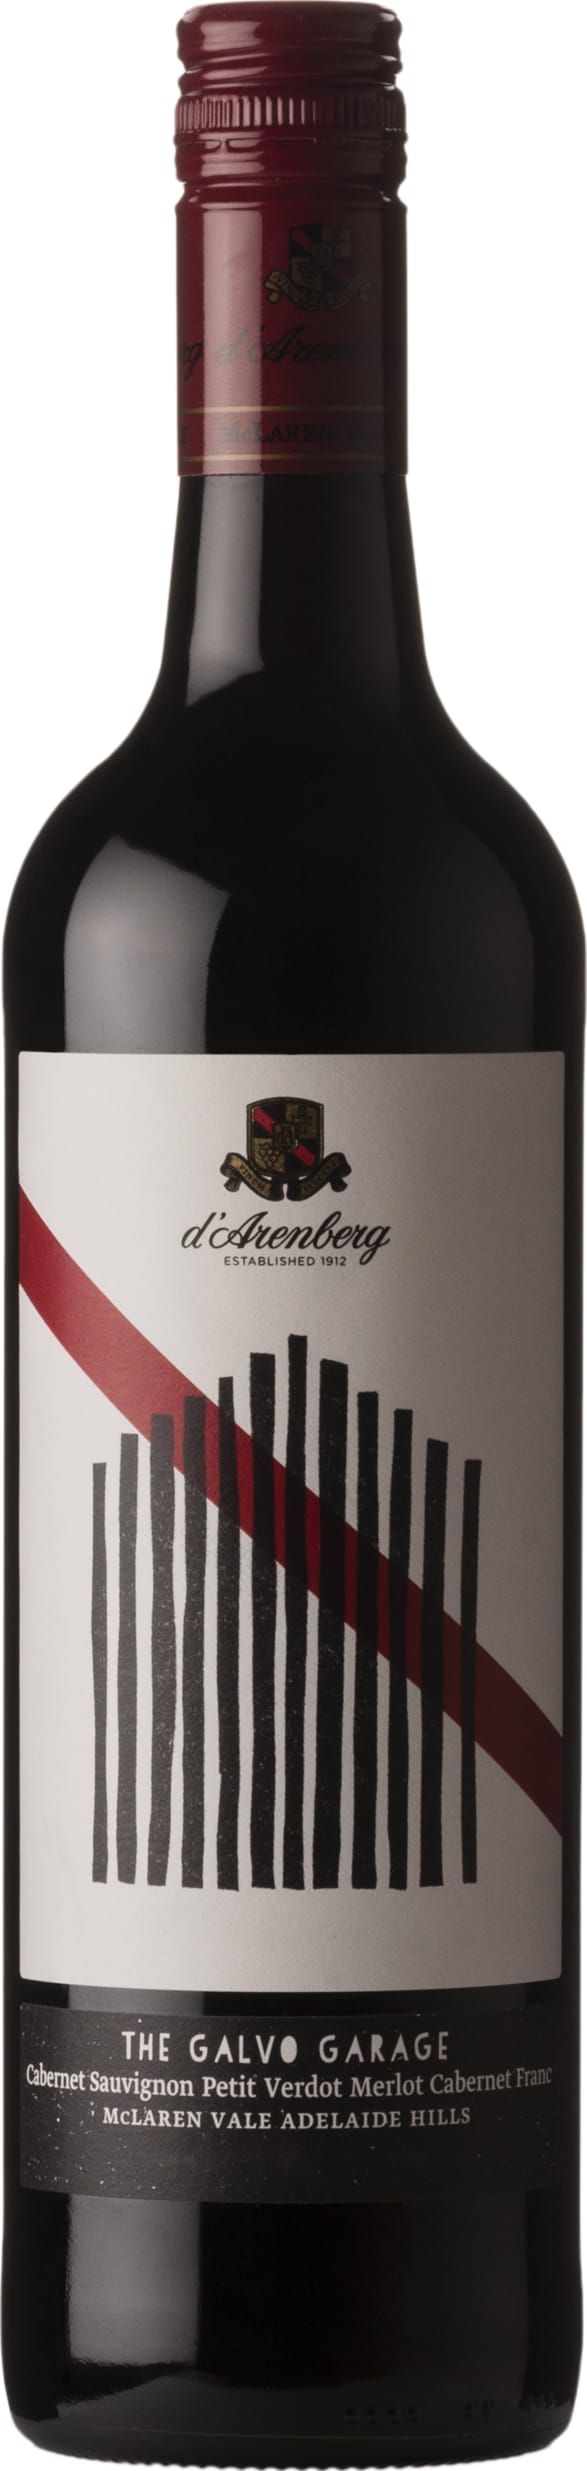 D Arenberg The Galvo Garage Cabernet Blend 2018 75cl - Buy D Arenberg Wines from GREAT WINES DIRECT wine shop